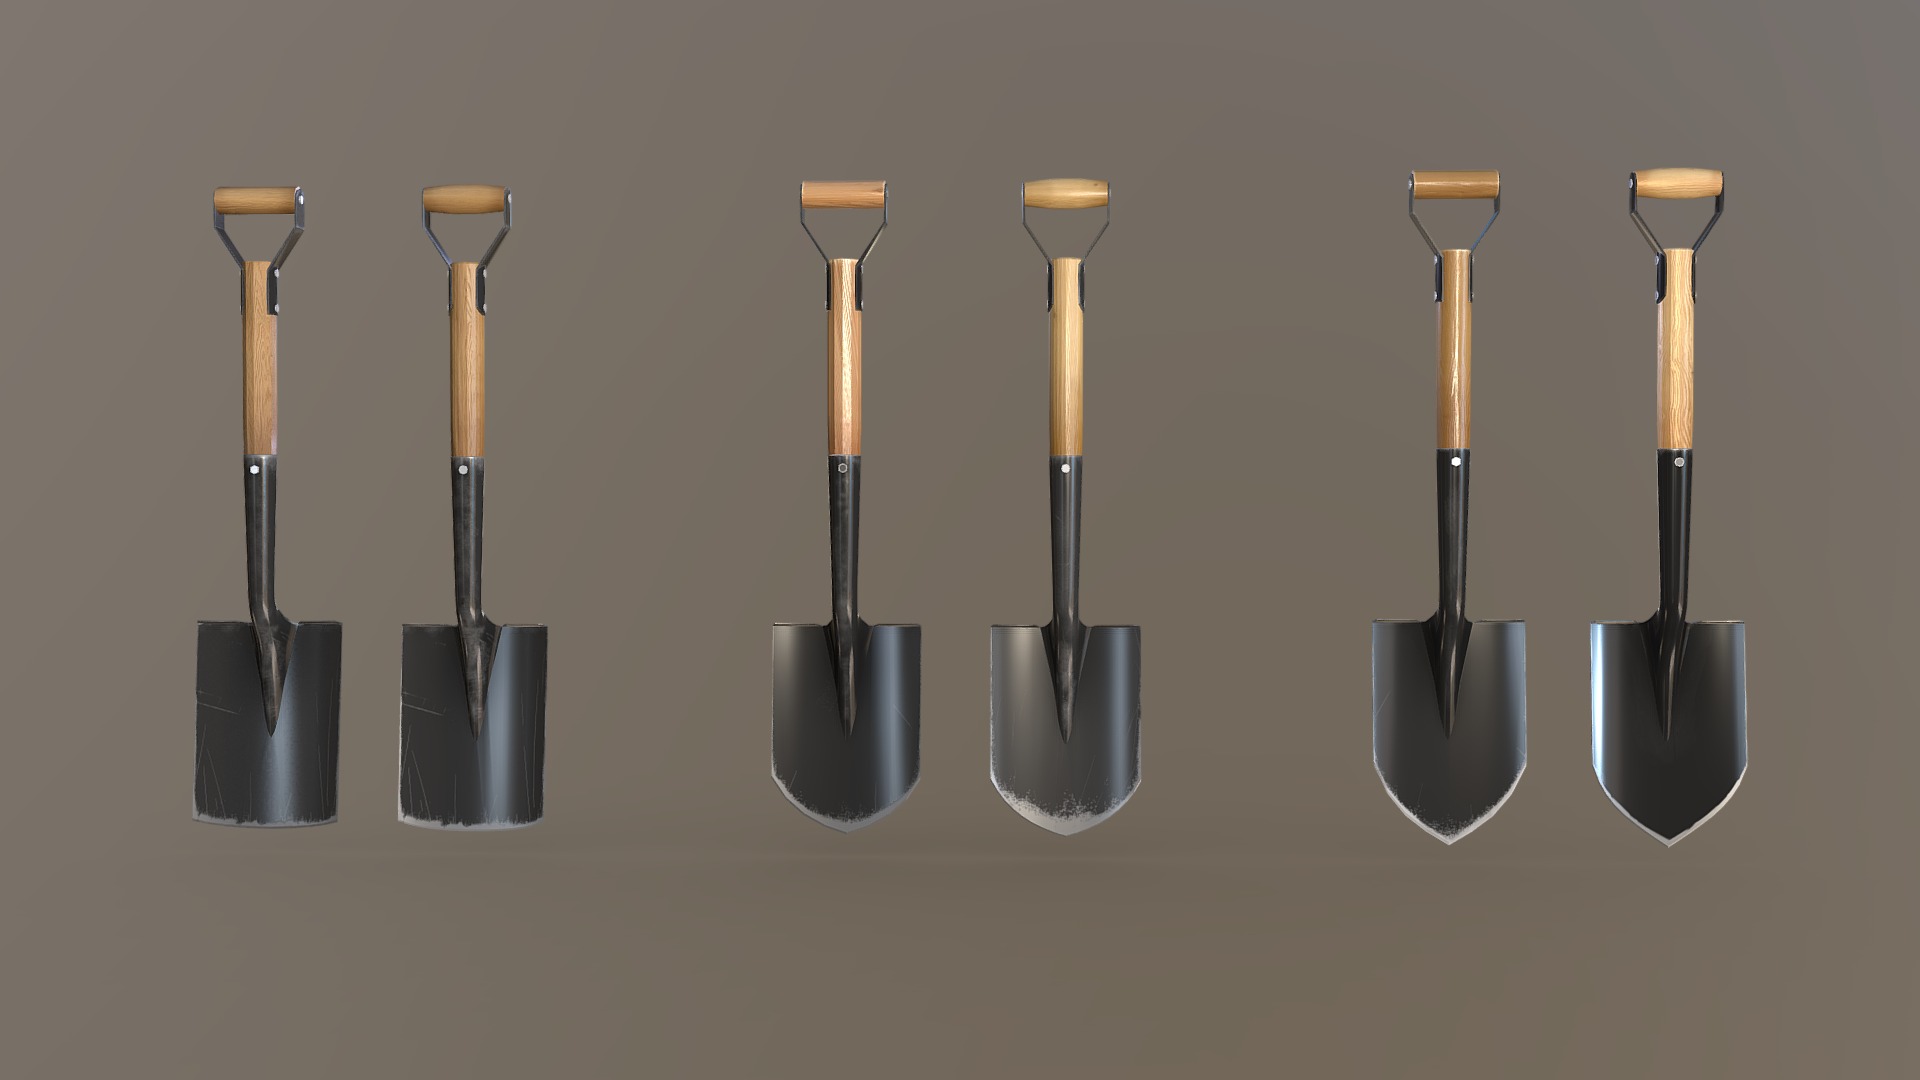 3D model Shovels - This is a 3D model of the Shovels. The 3D model is about a group of different sized and shaped syringes.